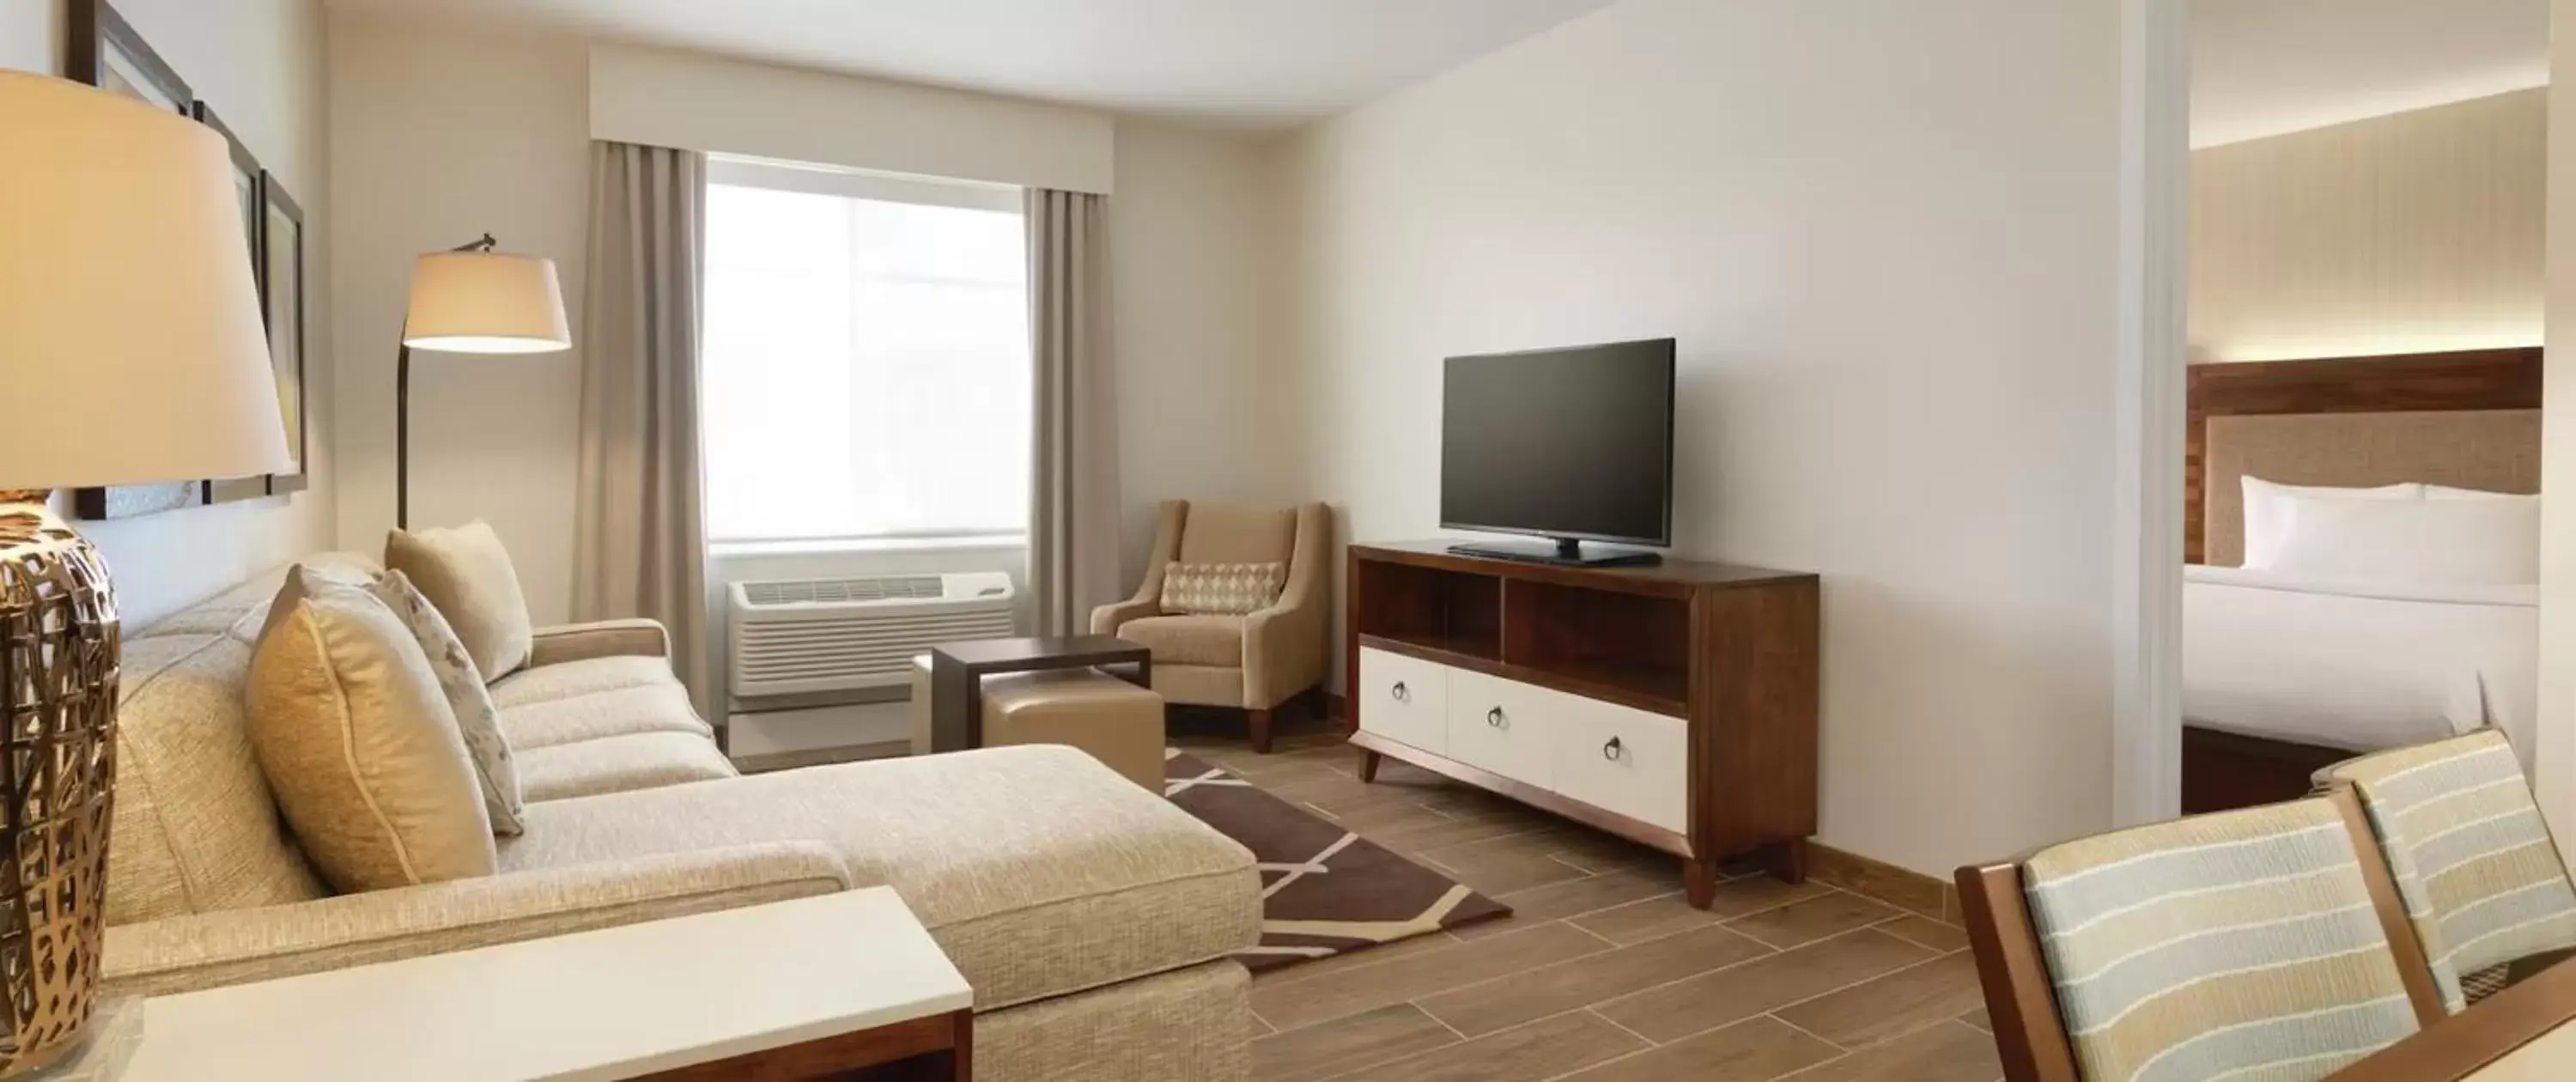 Bedroom, TV/Entertainment Center in Homewood Suites By Hilton Greenville, NC